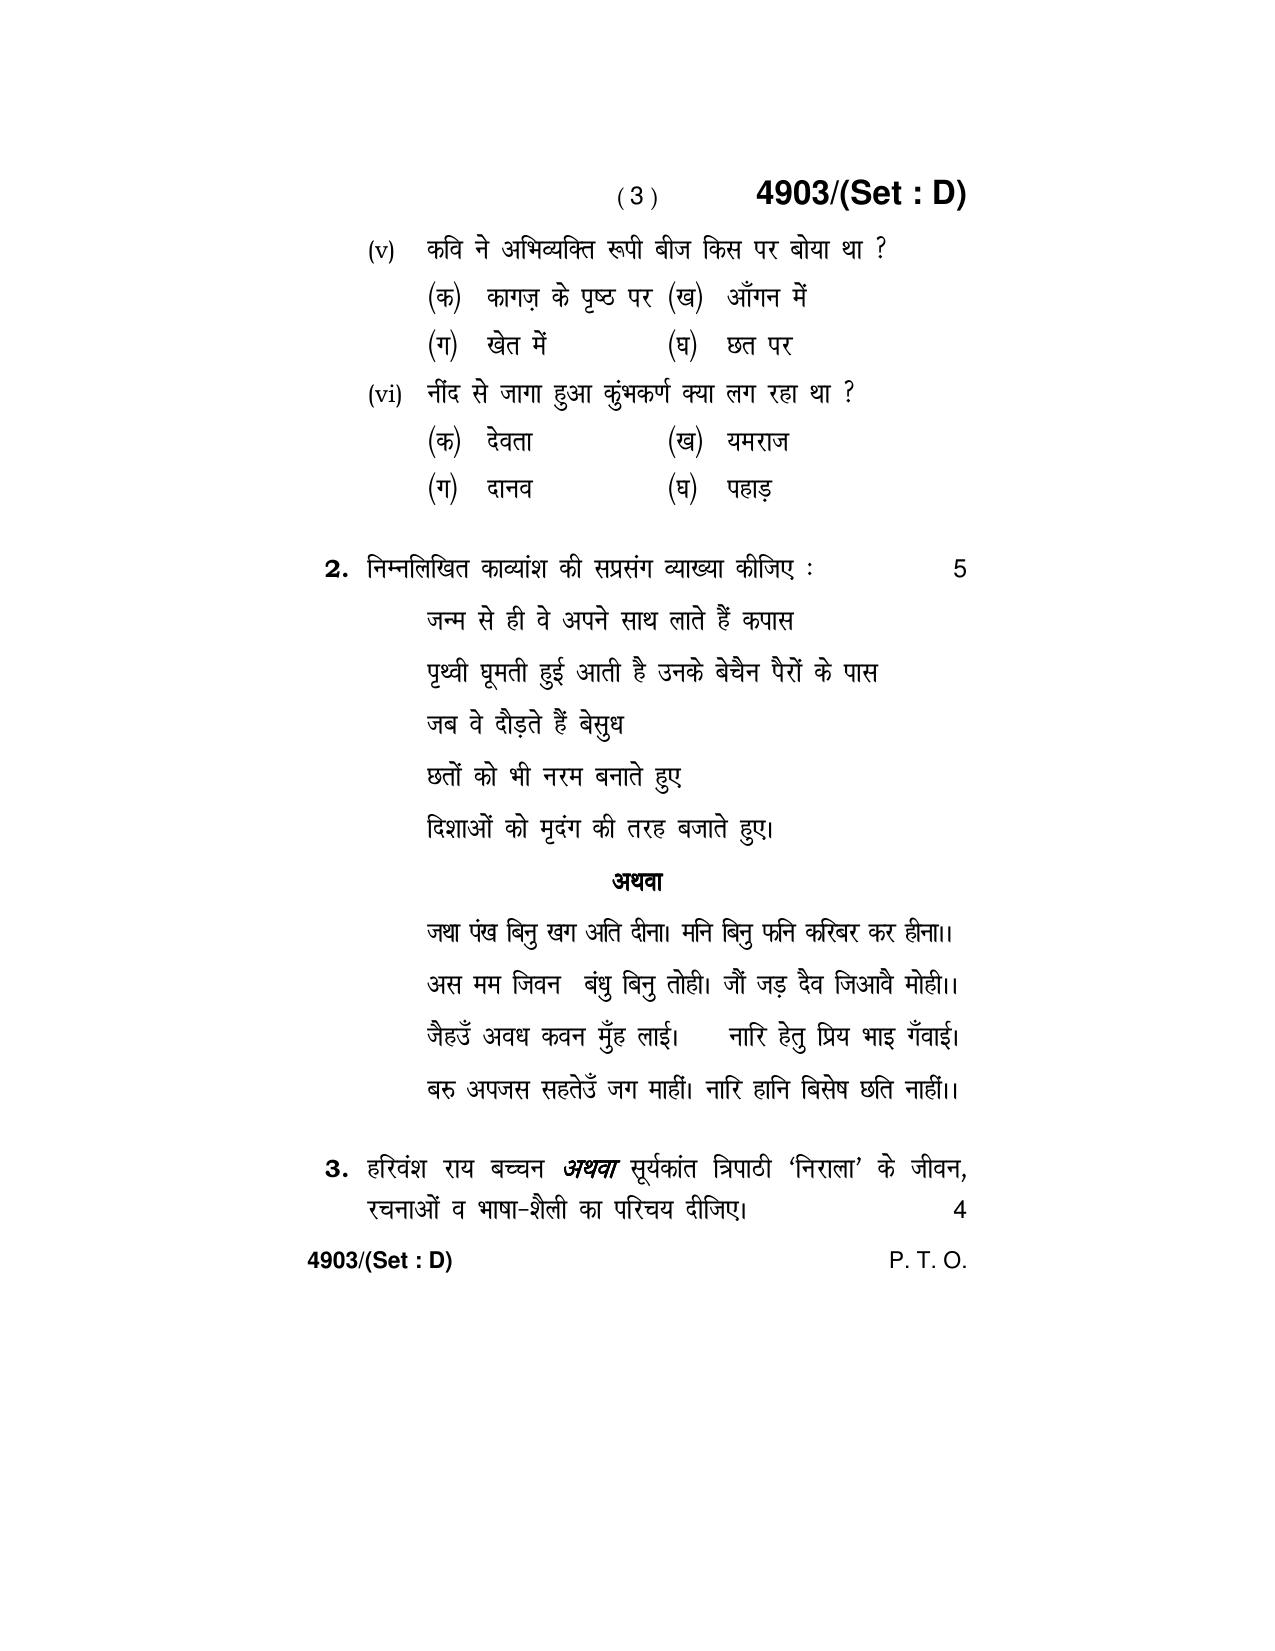 Haryana Board HBSE Class 12 Hindi Core 2020 Question Paper - Page 27